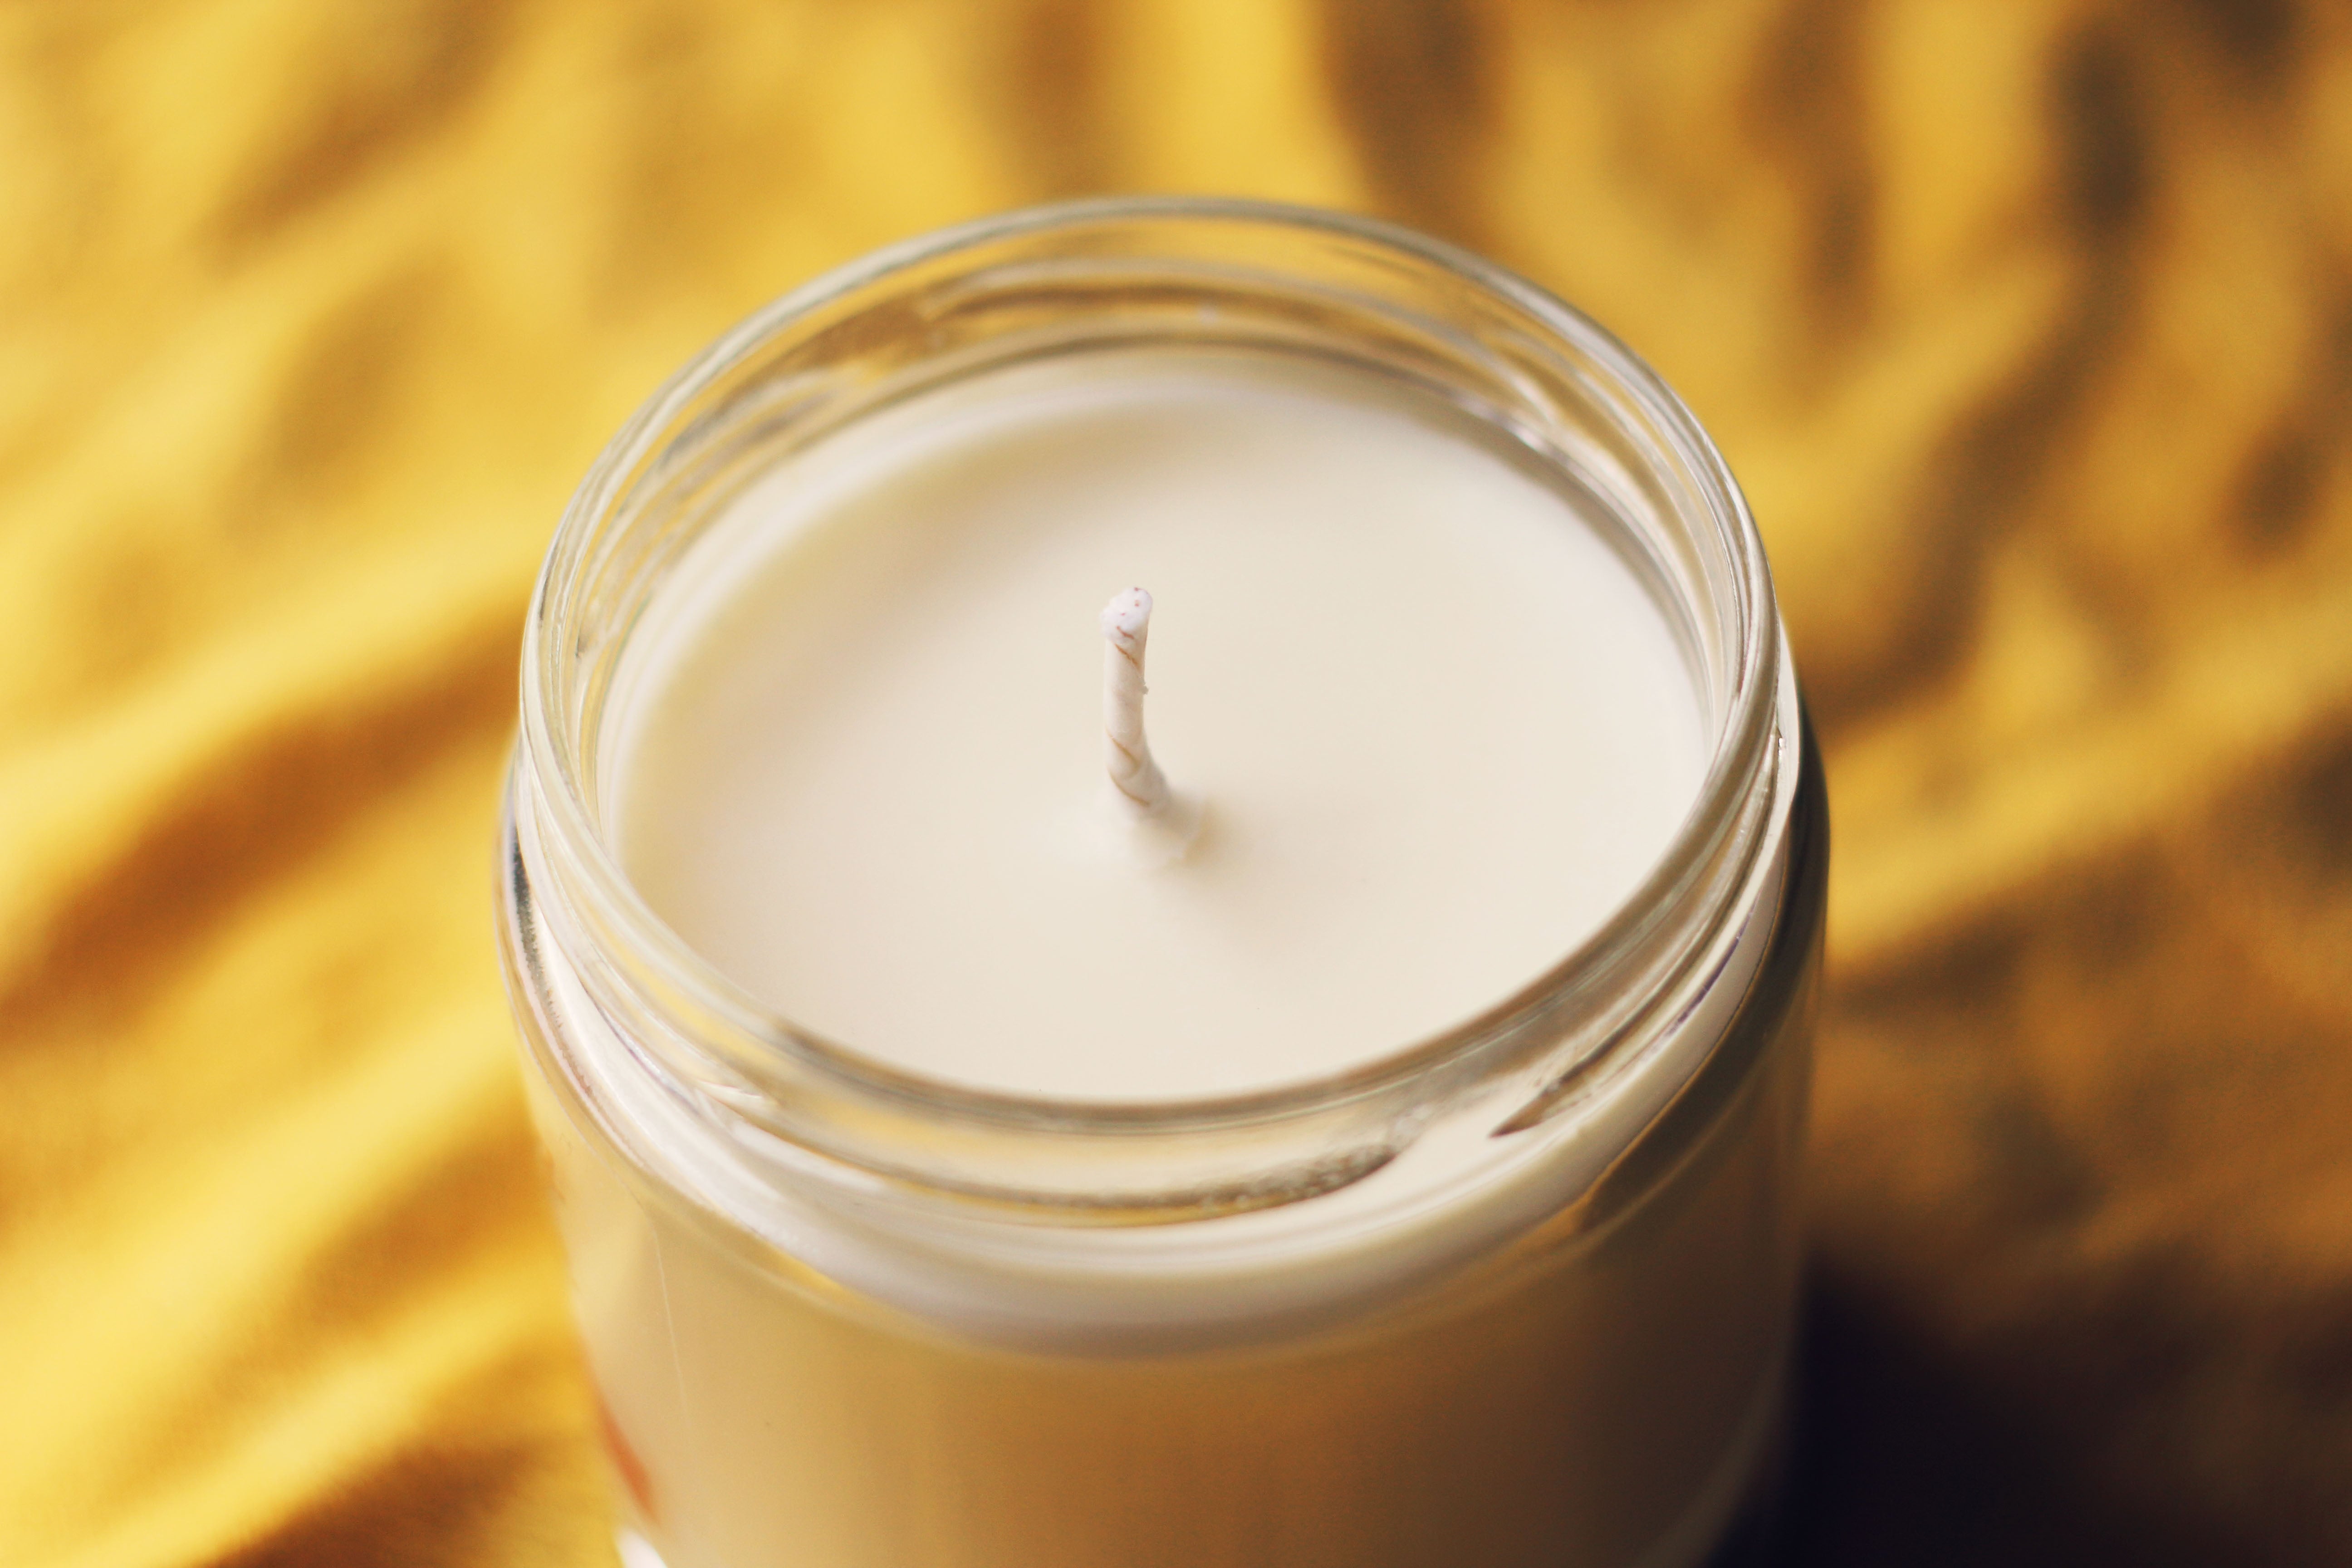 Soy Wax Candles vs. Paraffin Wax Candles - Blended Waxes